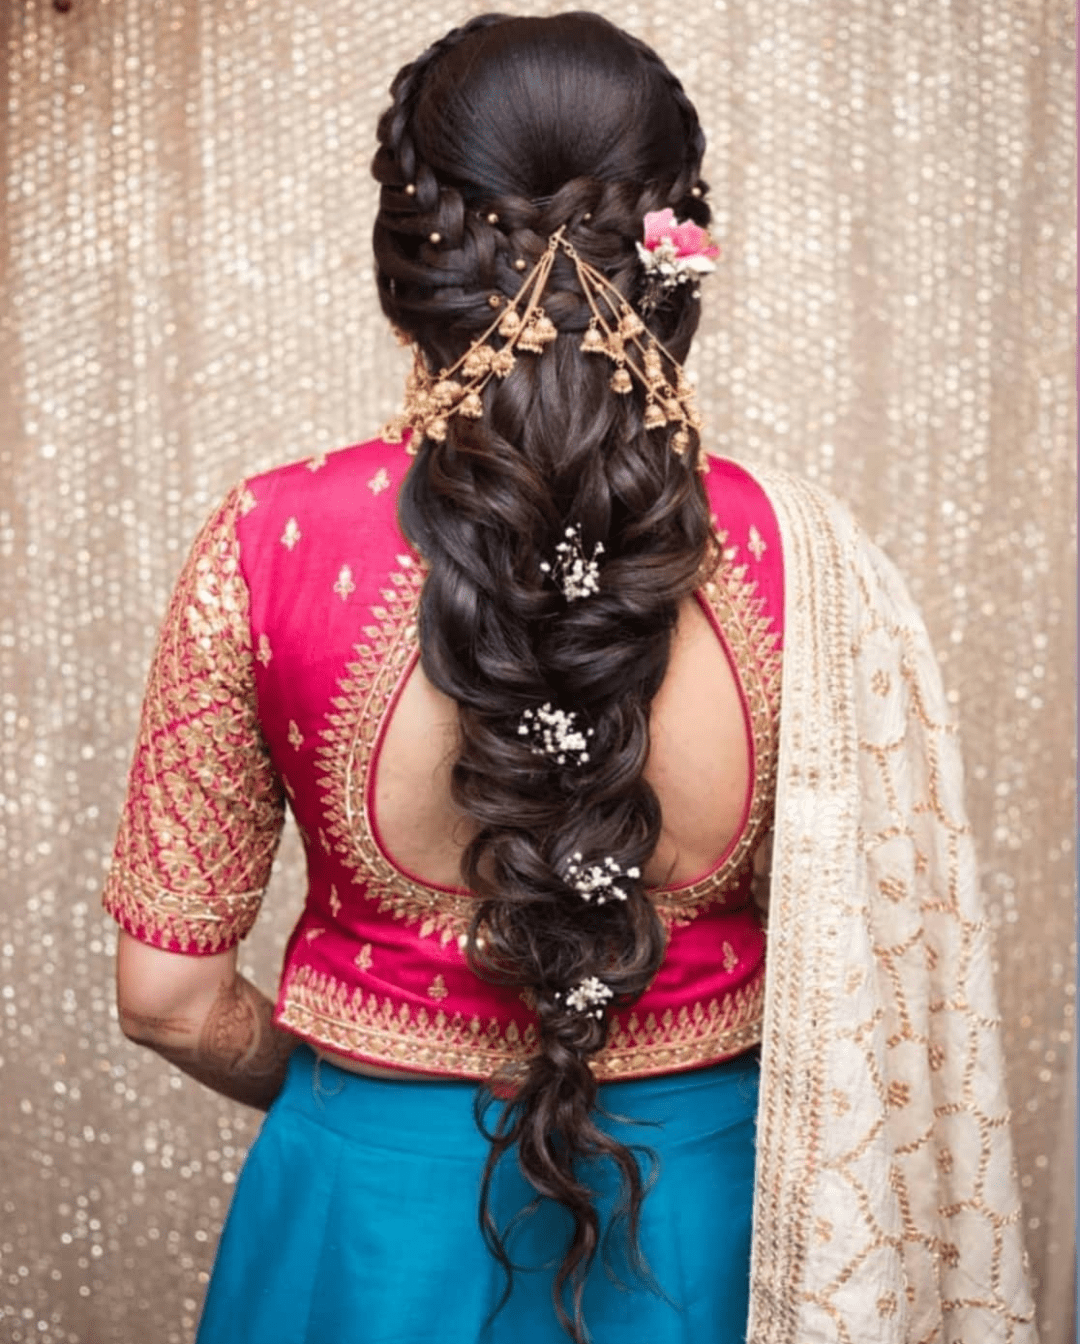 Christian Wedding Bridal Makeup And Hairstyles Read This And Choose  Rightly  Skulpt Wedding  Bridal Makeup in Chennai